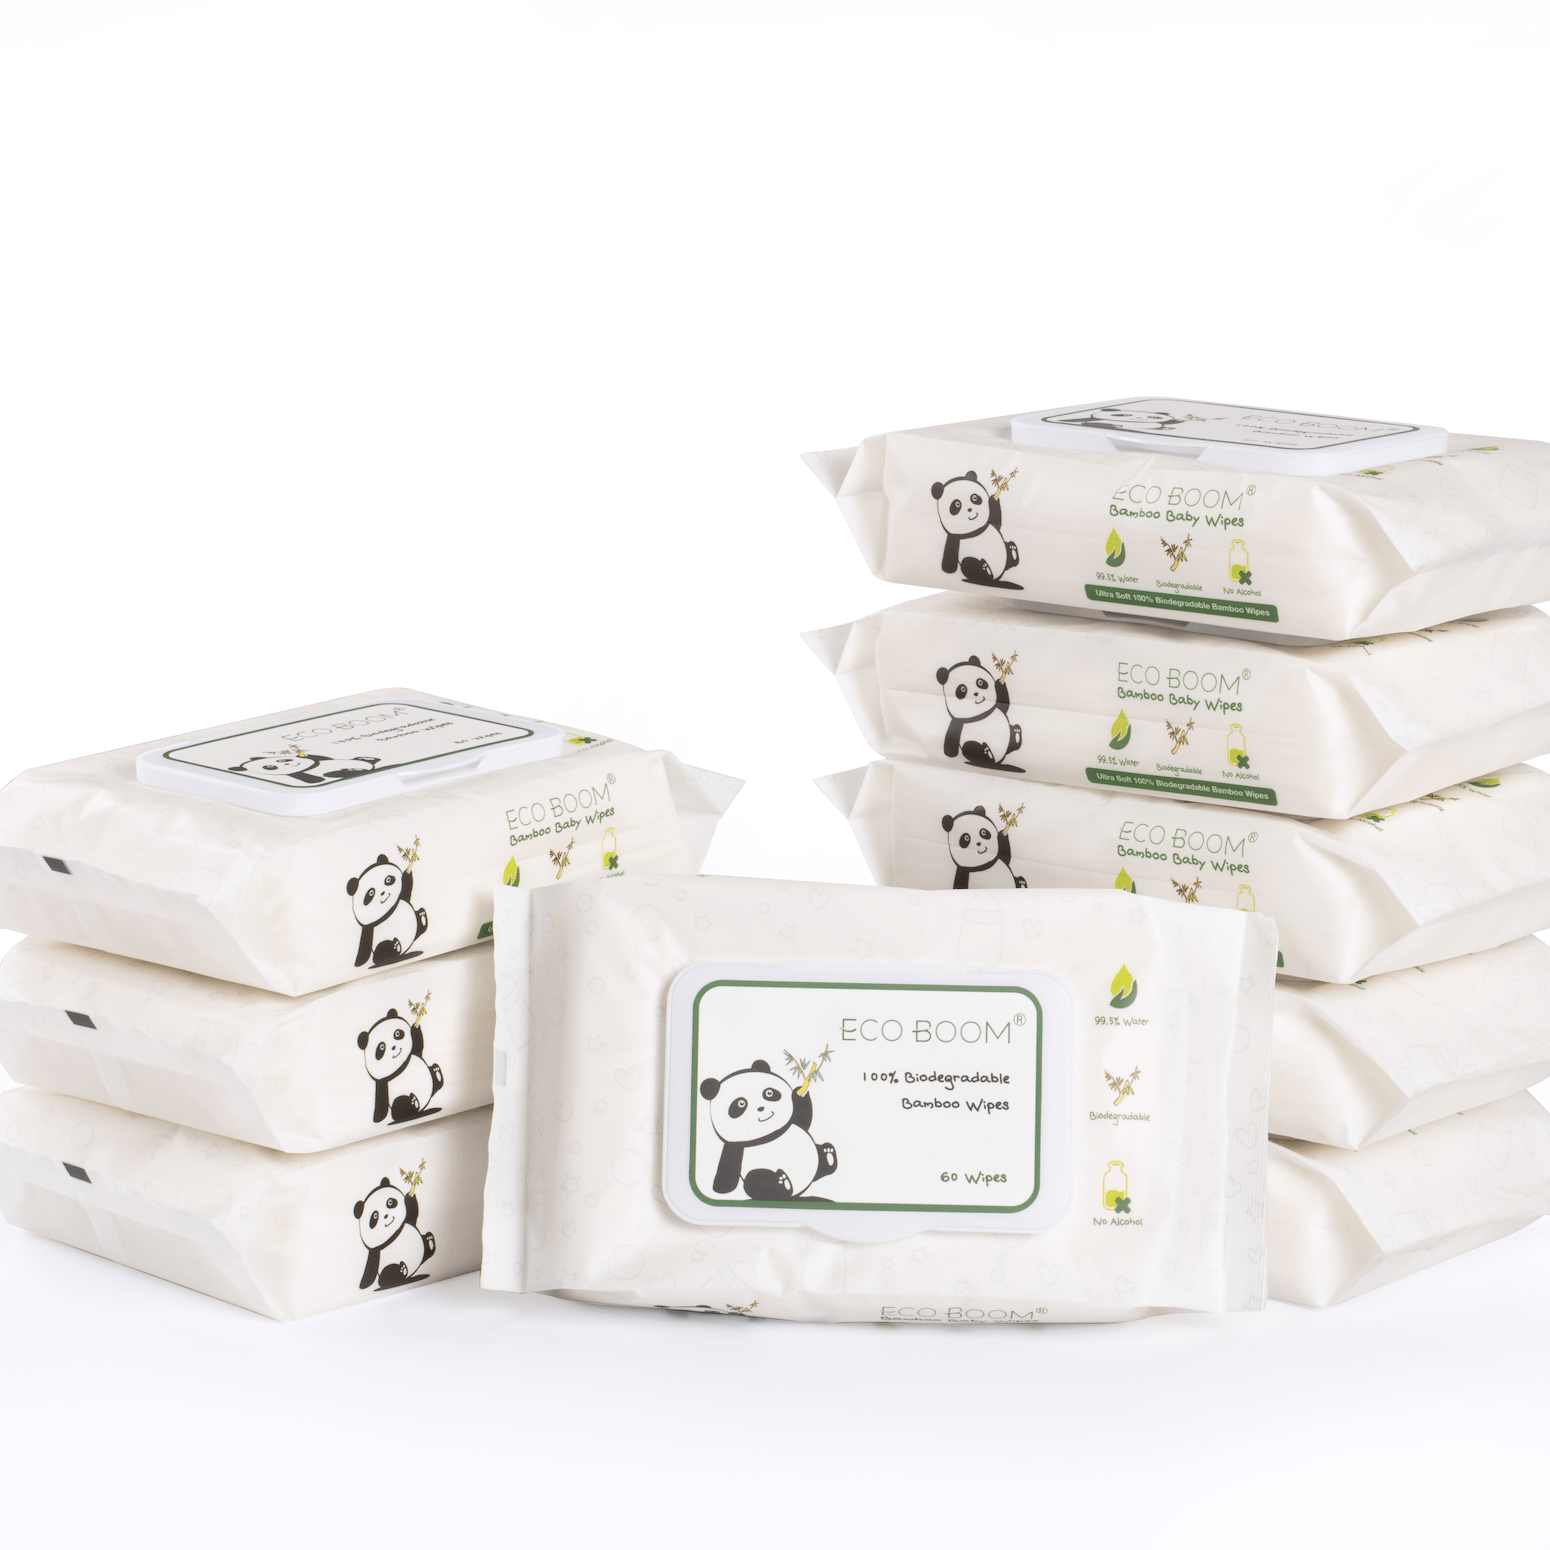 Bamboo Baby Wet Wipes (60) - Wildsprout